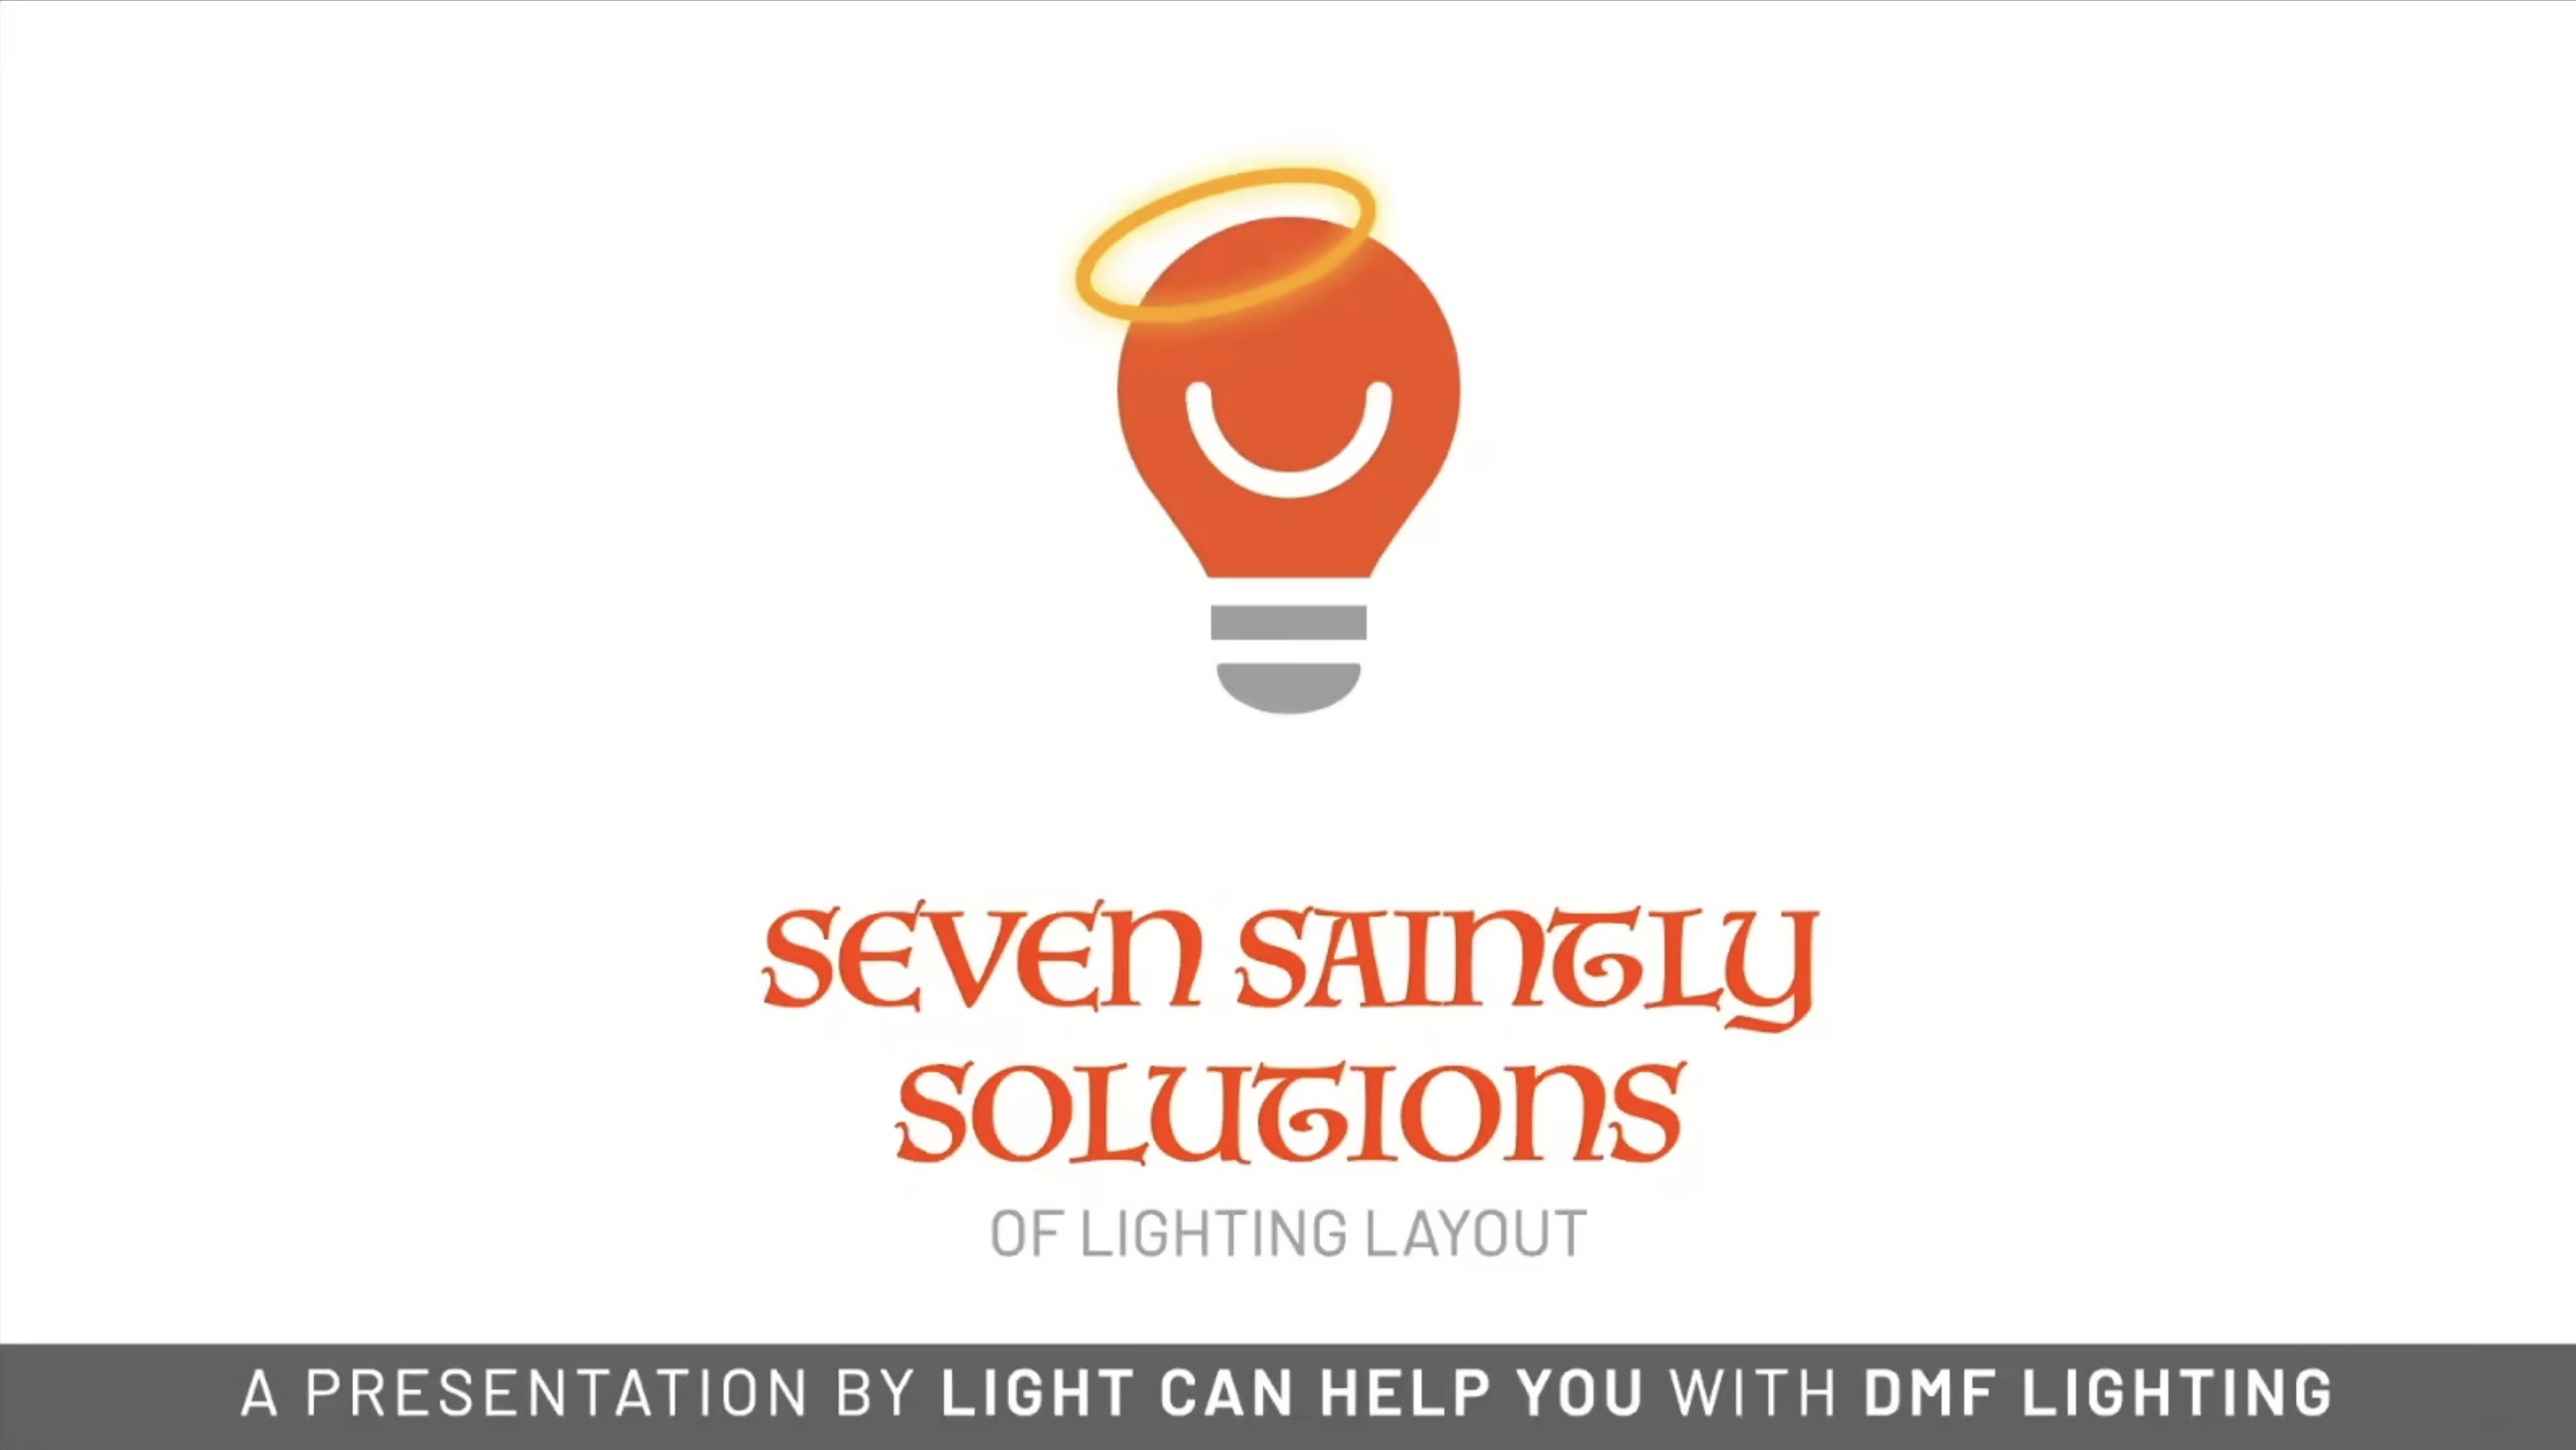 The Light Can Help You Logo, which is a light bulb with a smile, with a halo. Title of the presentation: Seven Saintly Solutions of Lighting Layout - A Presentation by Light Can Help You with DMF Lighting